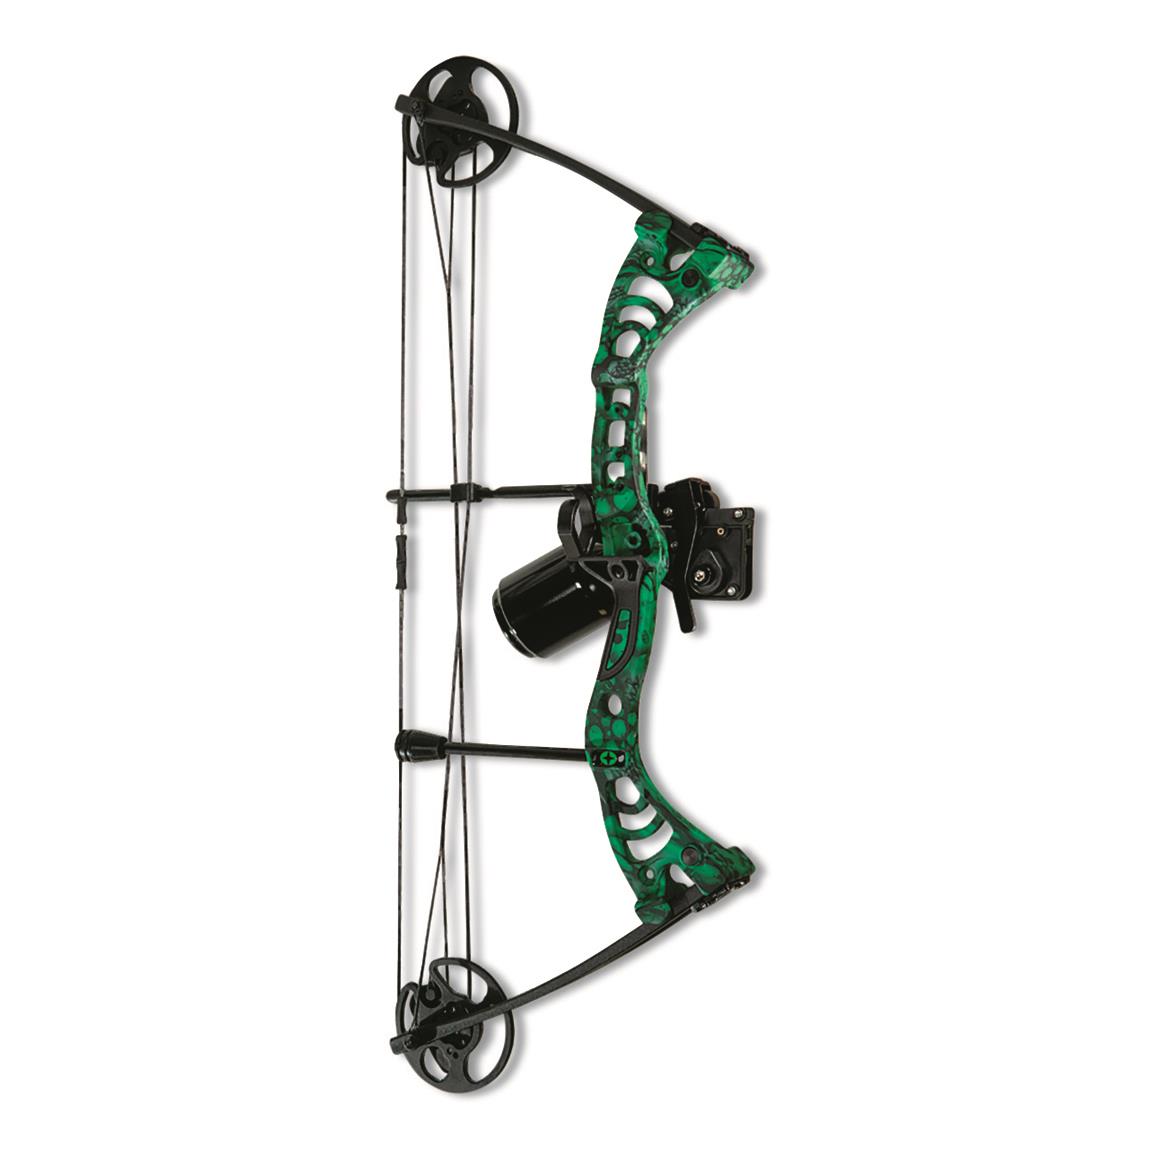 NEW! CenterPoint Typhon X1 Bowfishing Compound Bow Package